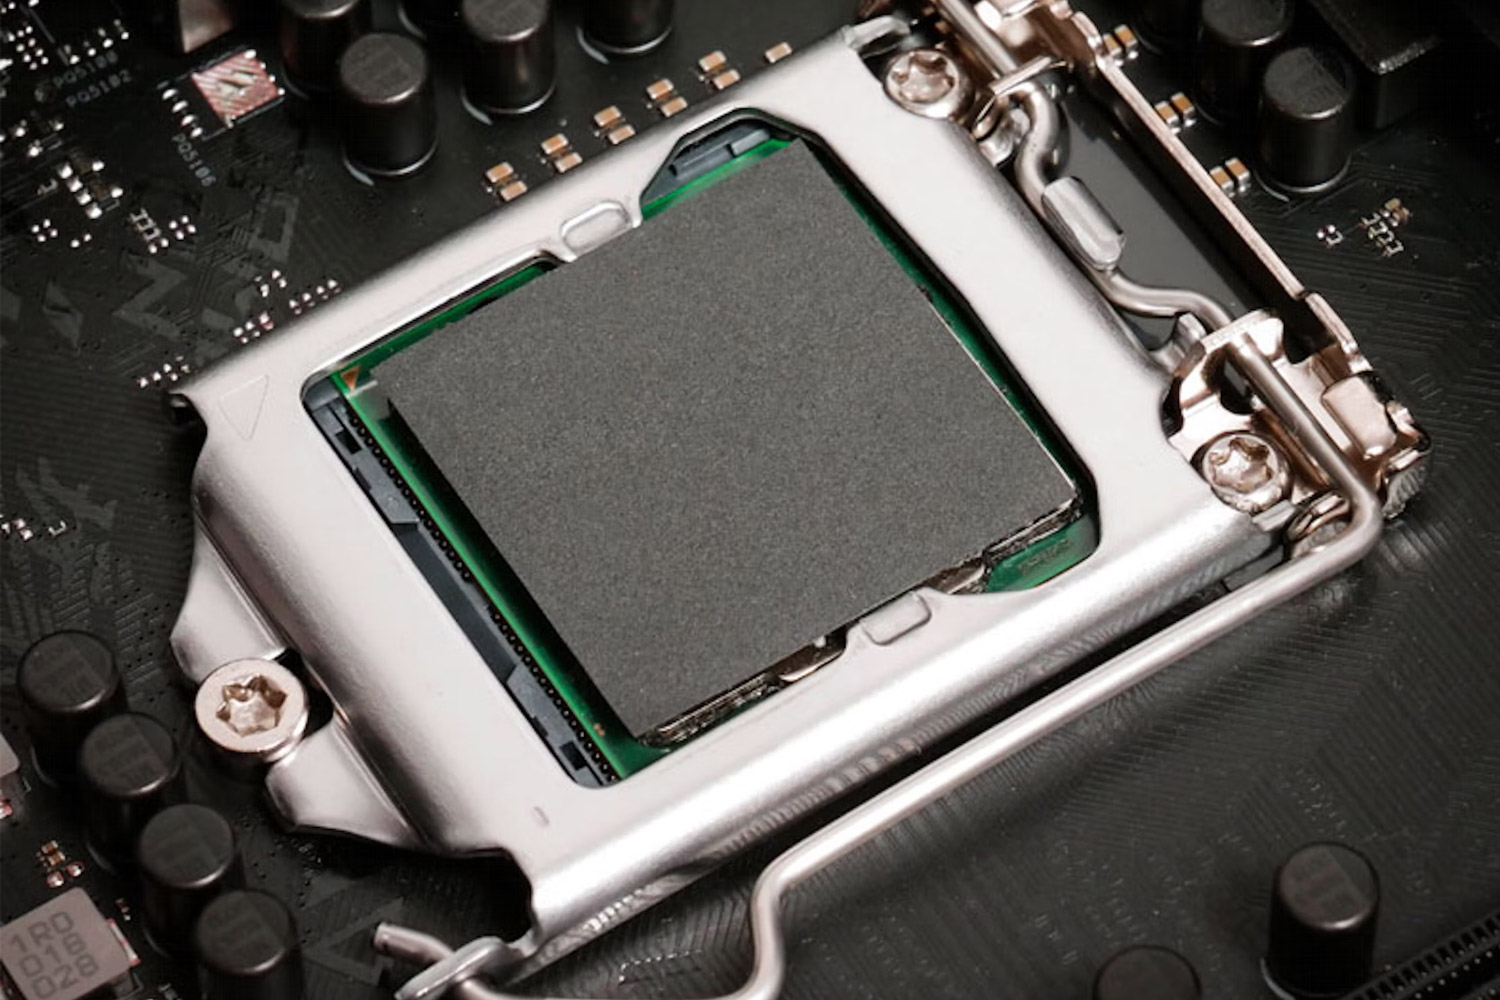 How to apply and clean off thermal paste